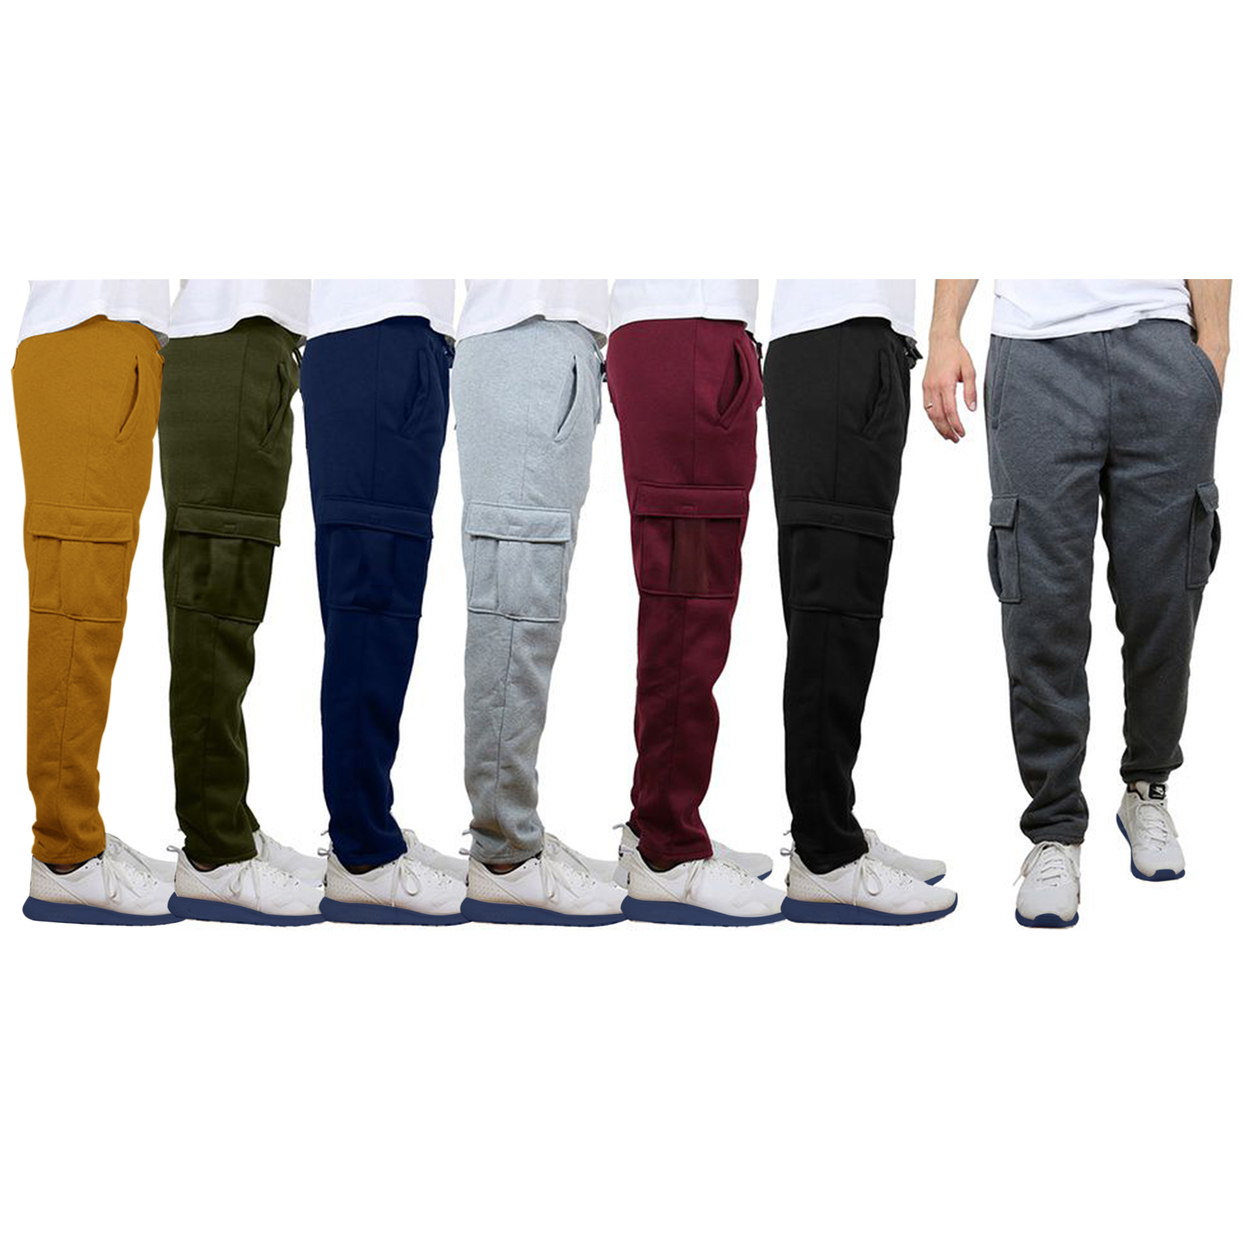 Multipack Men's Casual Solid Cargo Jogger Sweatpants With Pockets - 3, 2xl